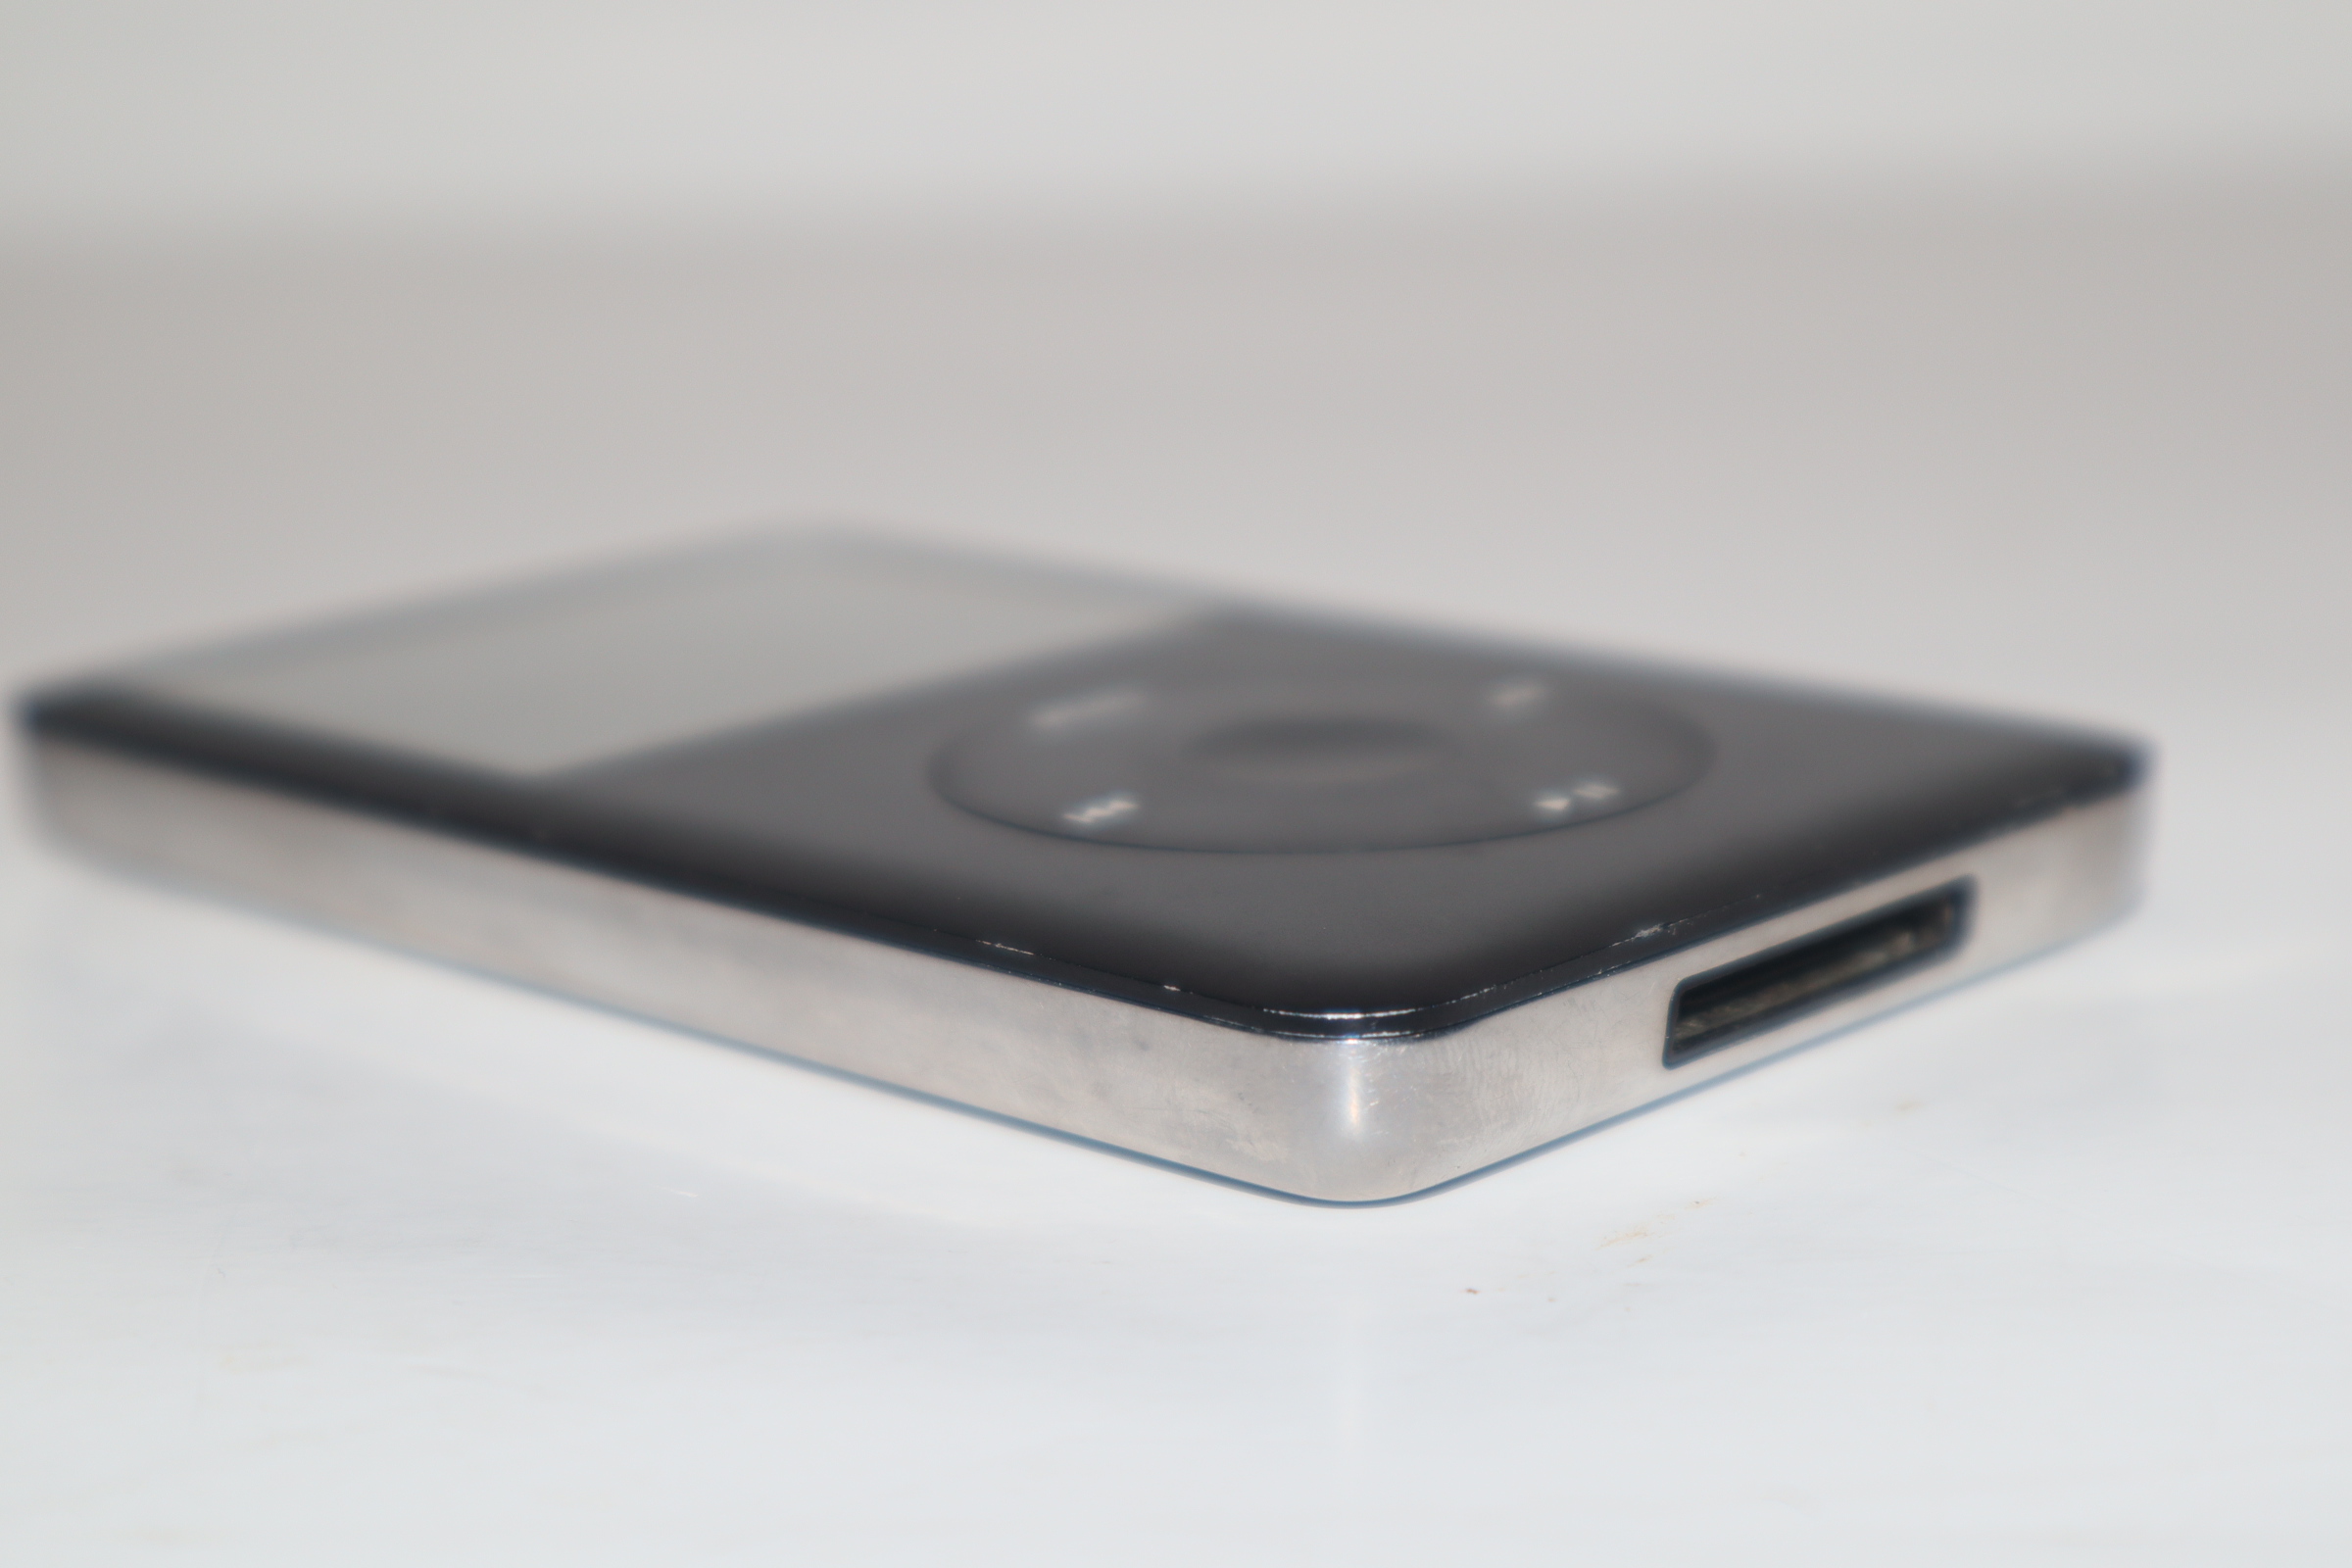 Apple iPod Classic 6th Generation - A1238 - 80GB - SILVER & BLACK - Tested